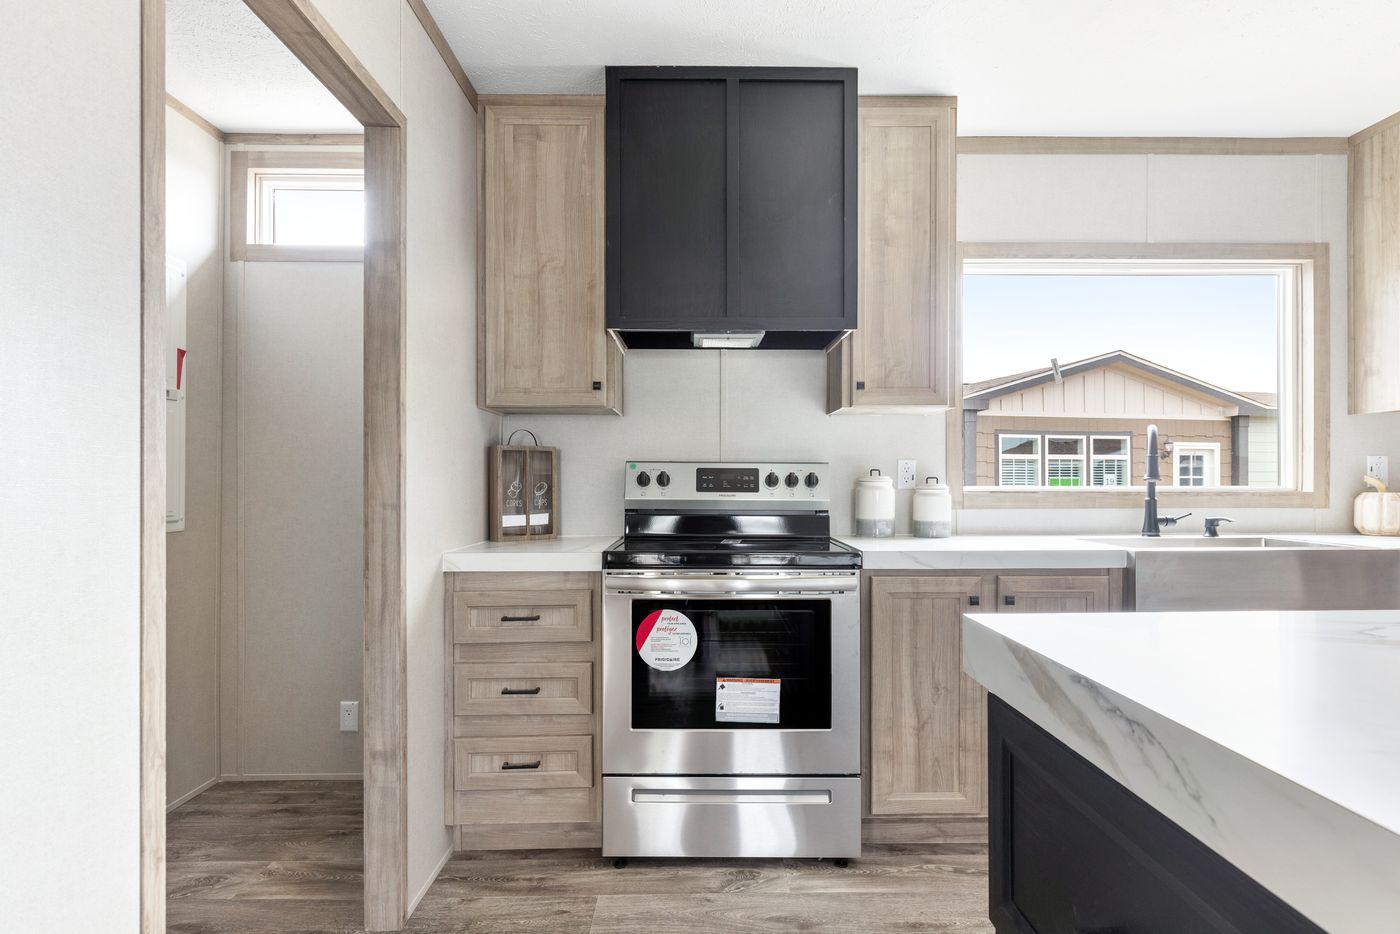 The STERLING XL ANNIVERSARY Kitchen. This Manufactured Mobile Home features 3 bedrooms and 2 baths.